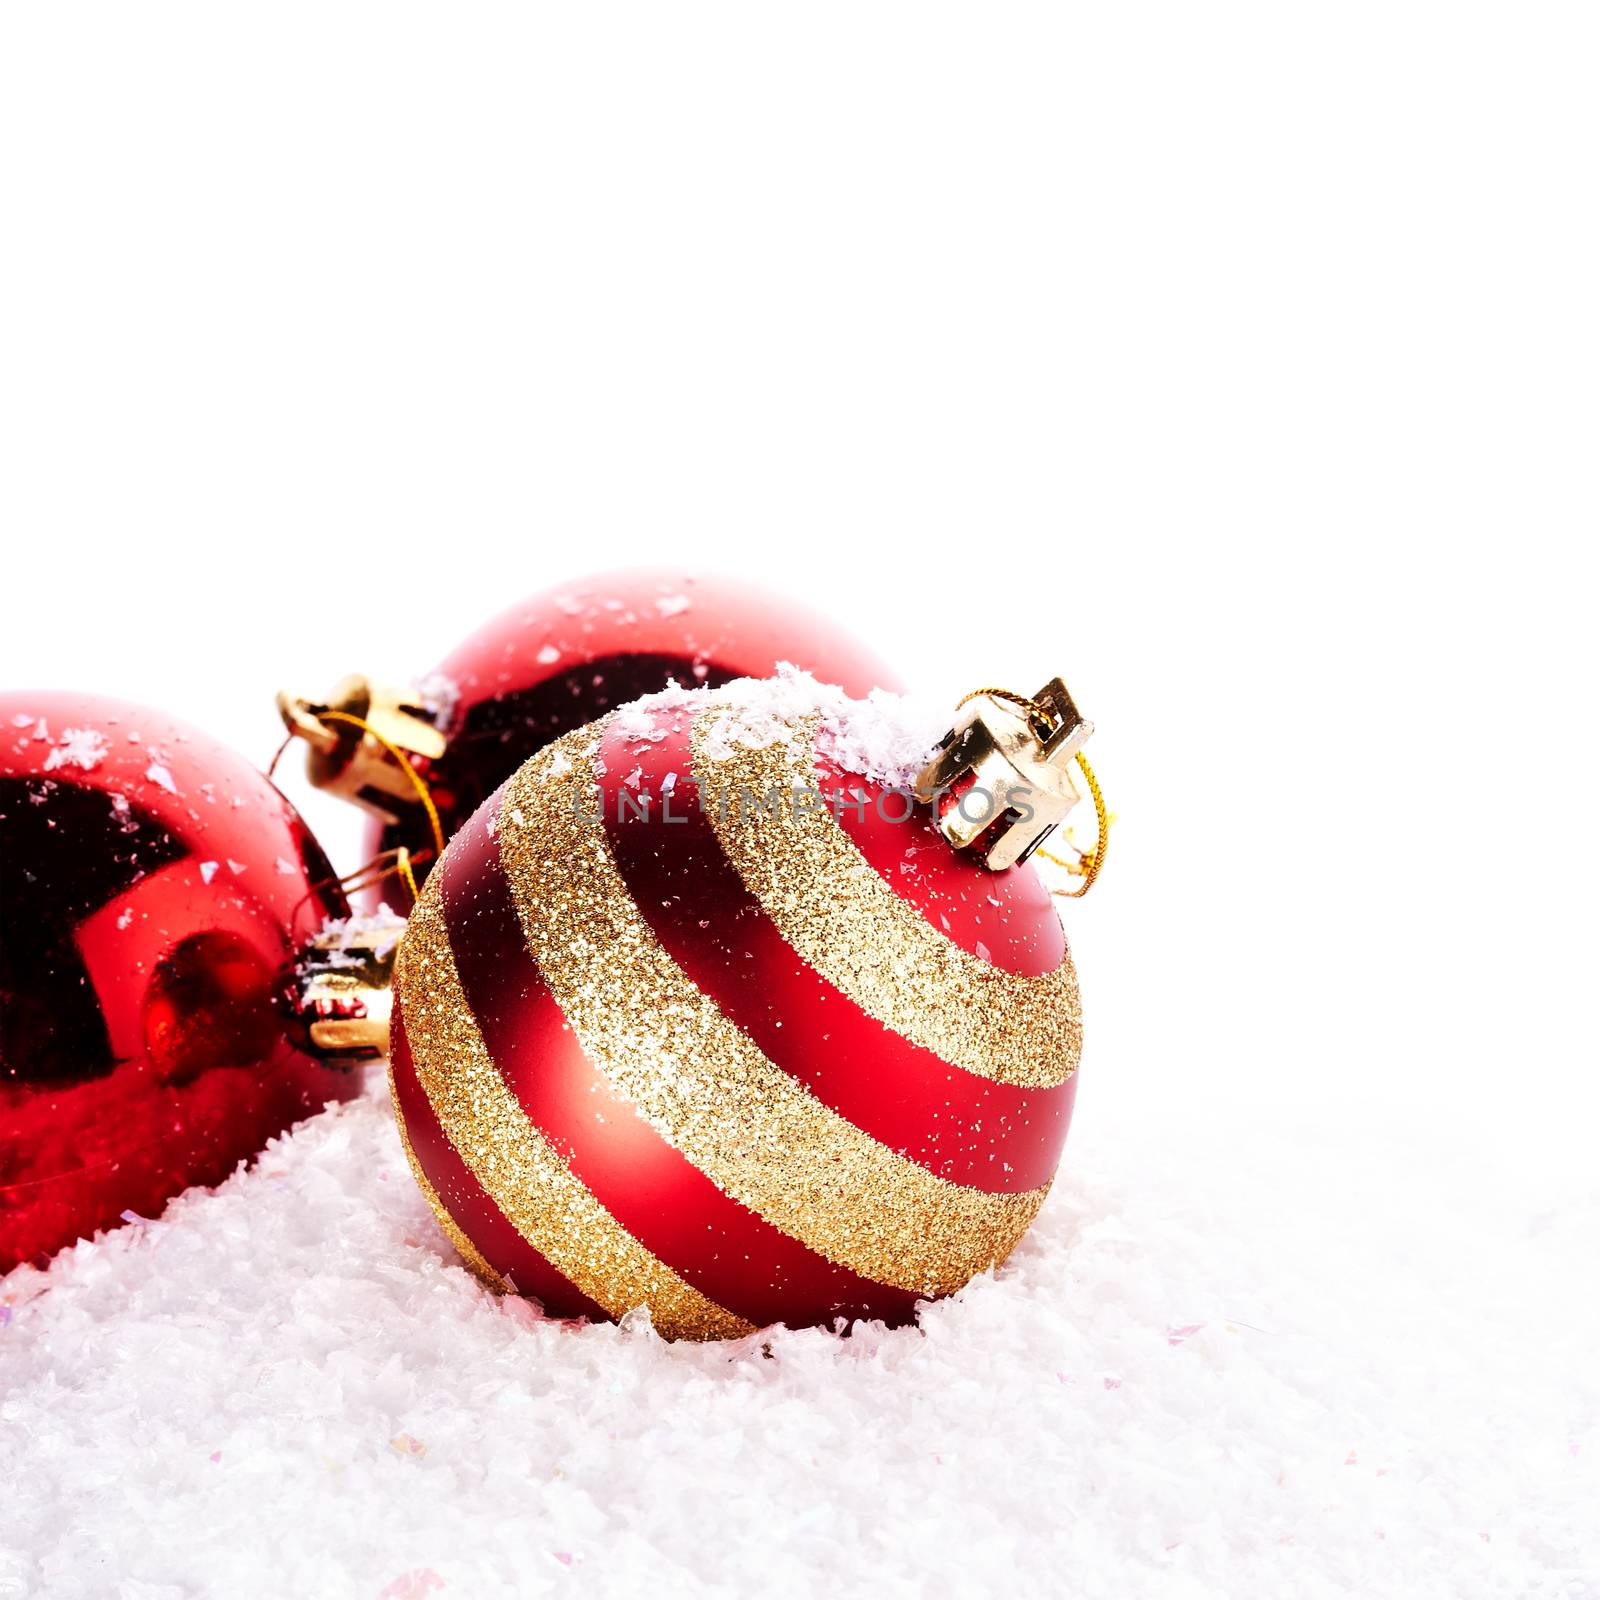 New Year's striped balls on snow. New Year's red balls. Christmas balls. Christmas tree decorations. Christmas jewelry.